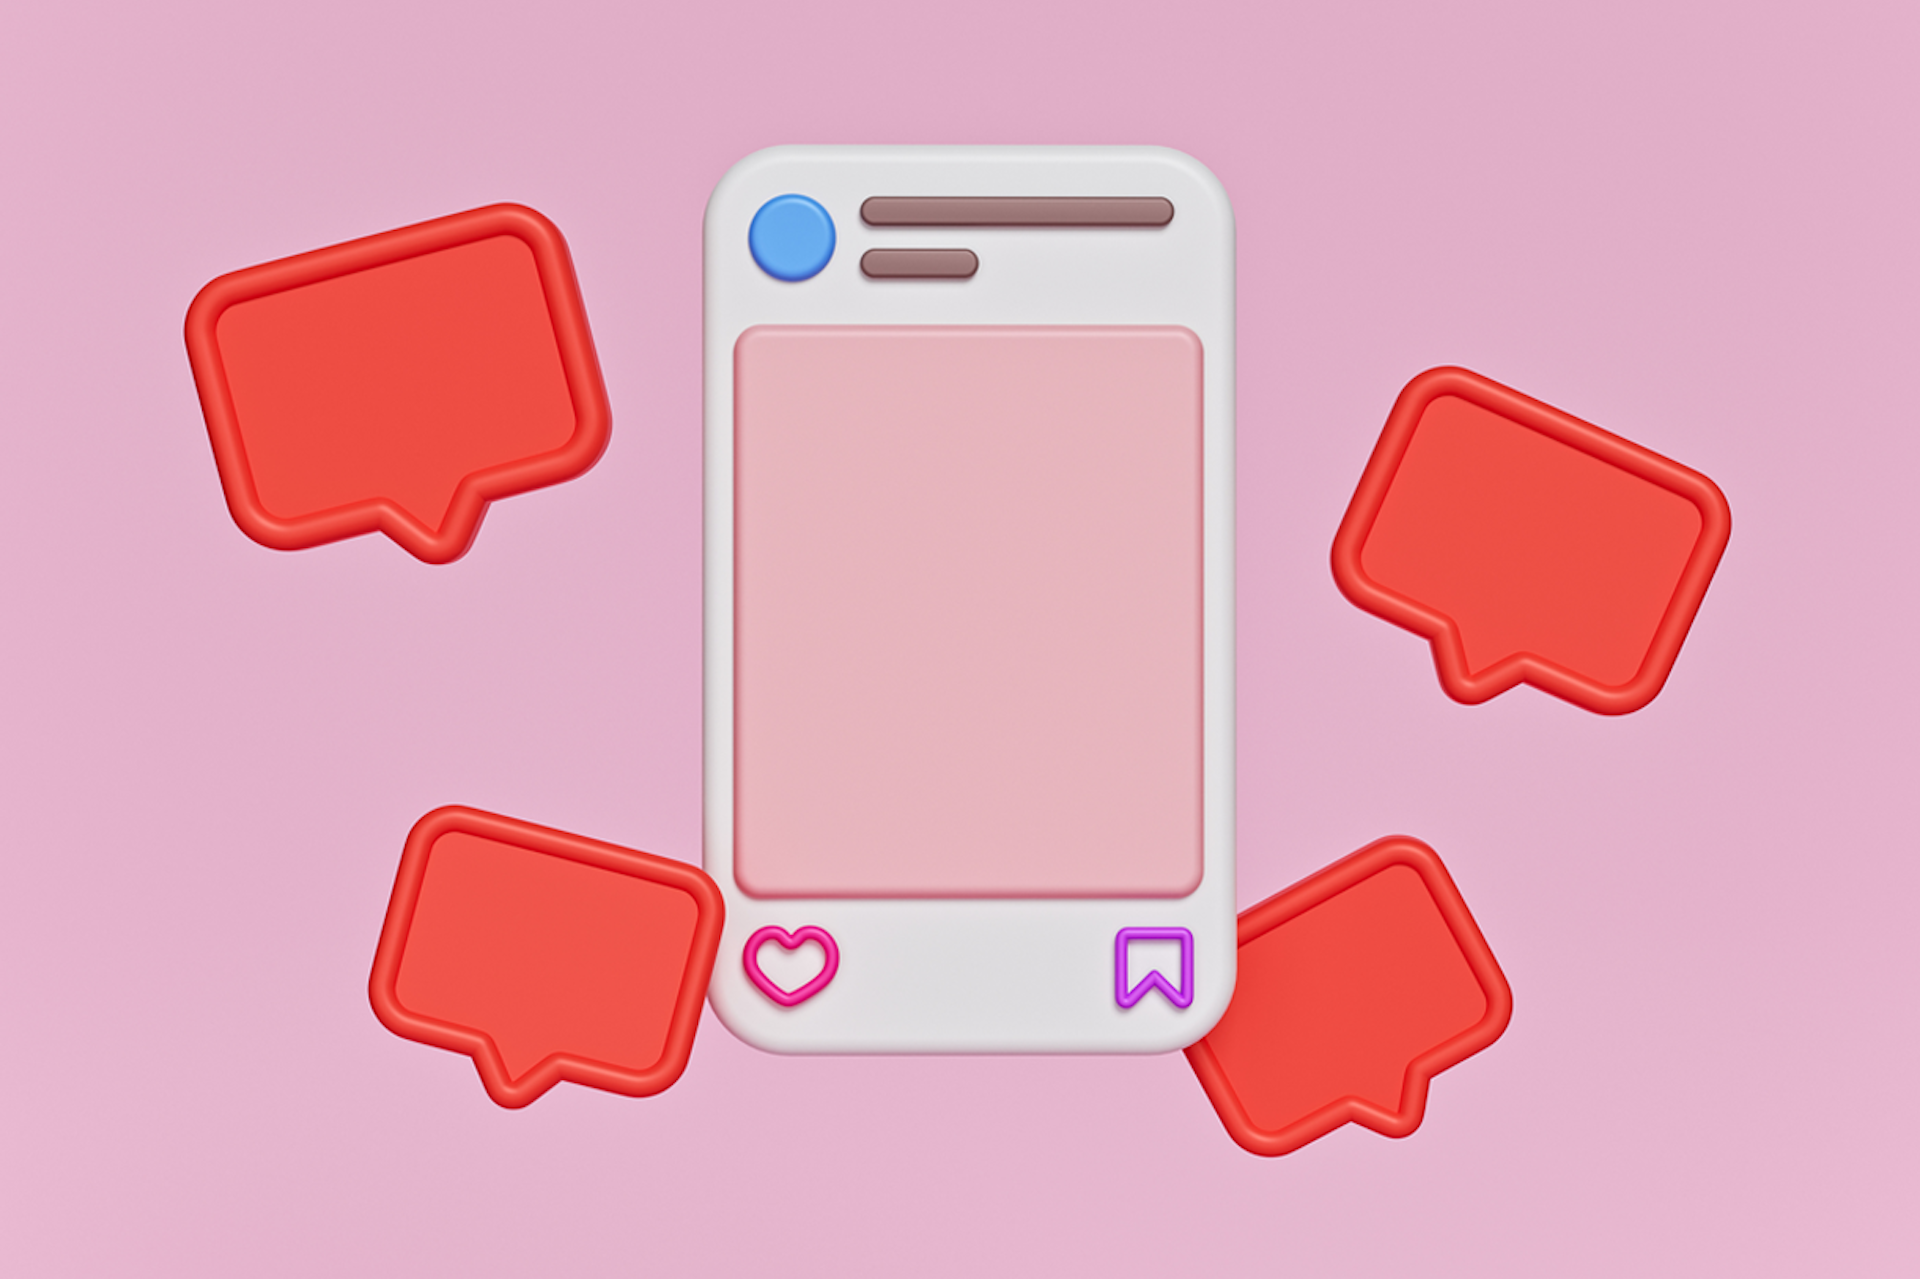 An image of a white smartphone against a pink background surrounded by red message boxes.